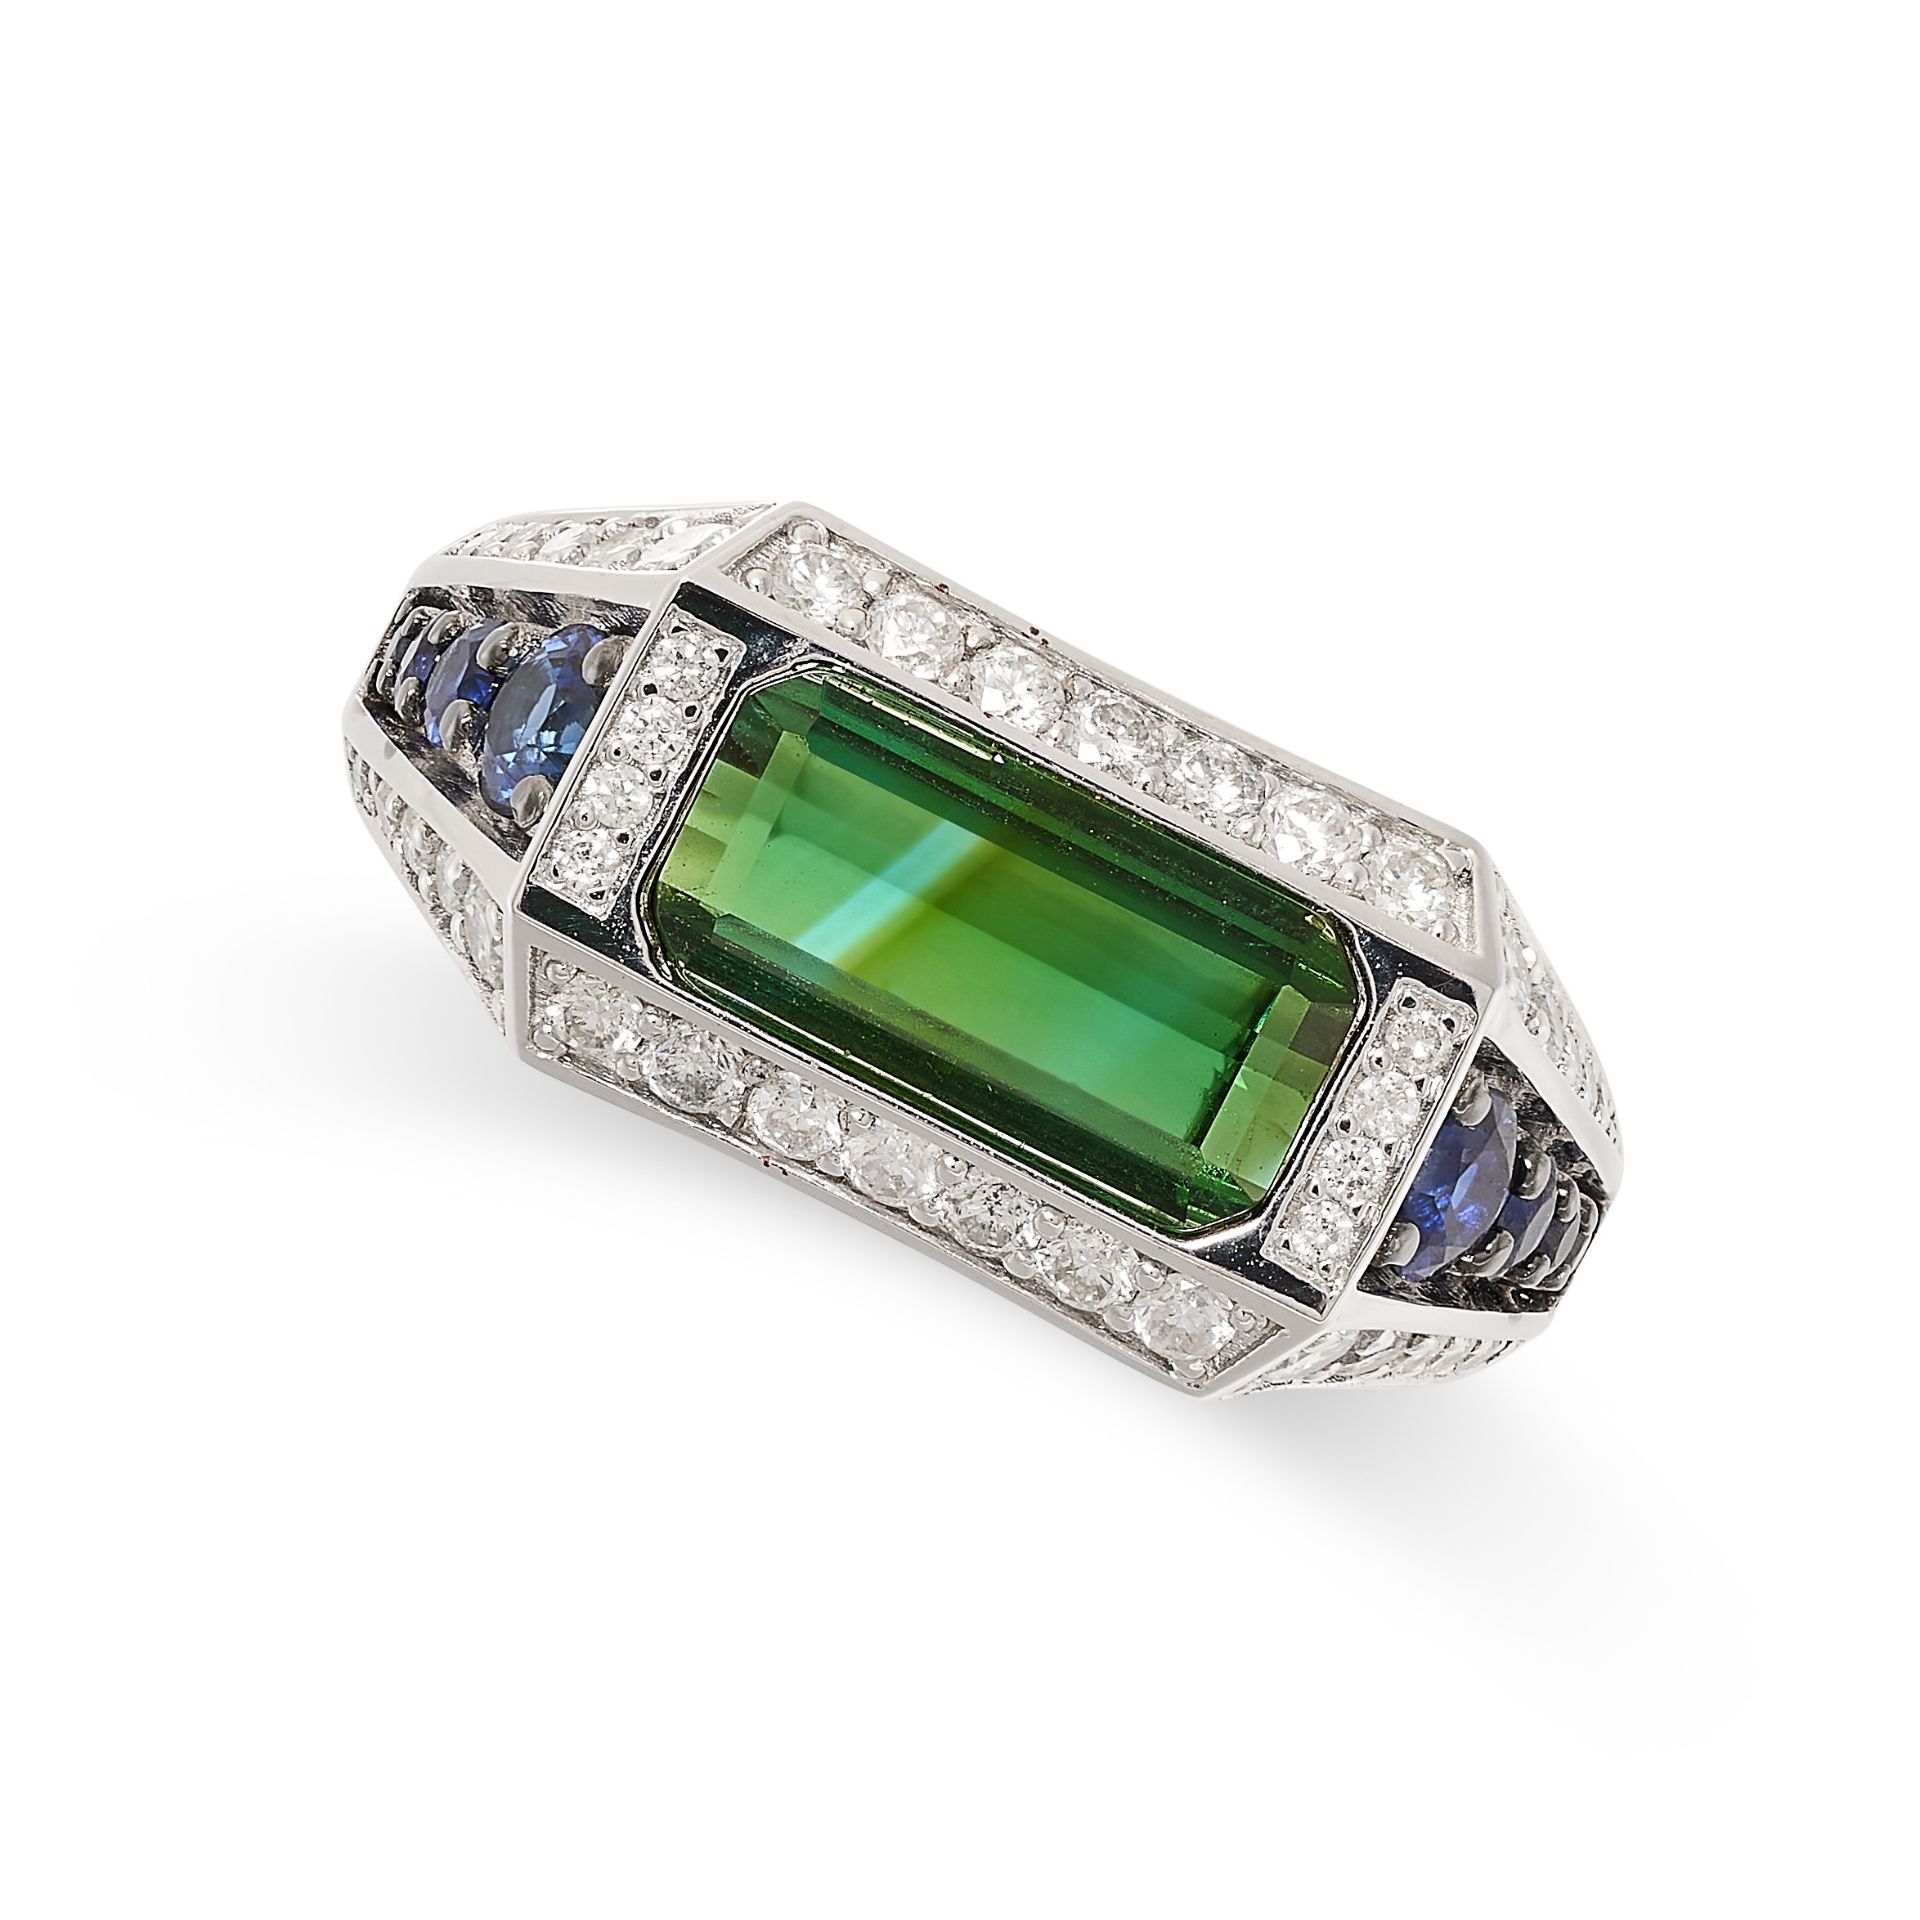 A TOURMALINE, SAPPHIRE AND DIAMOND RING in 18ct white gold, set with an emerald cut tourmaline of